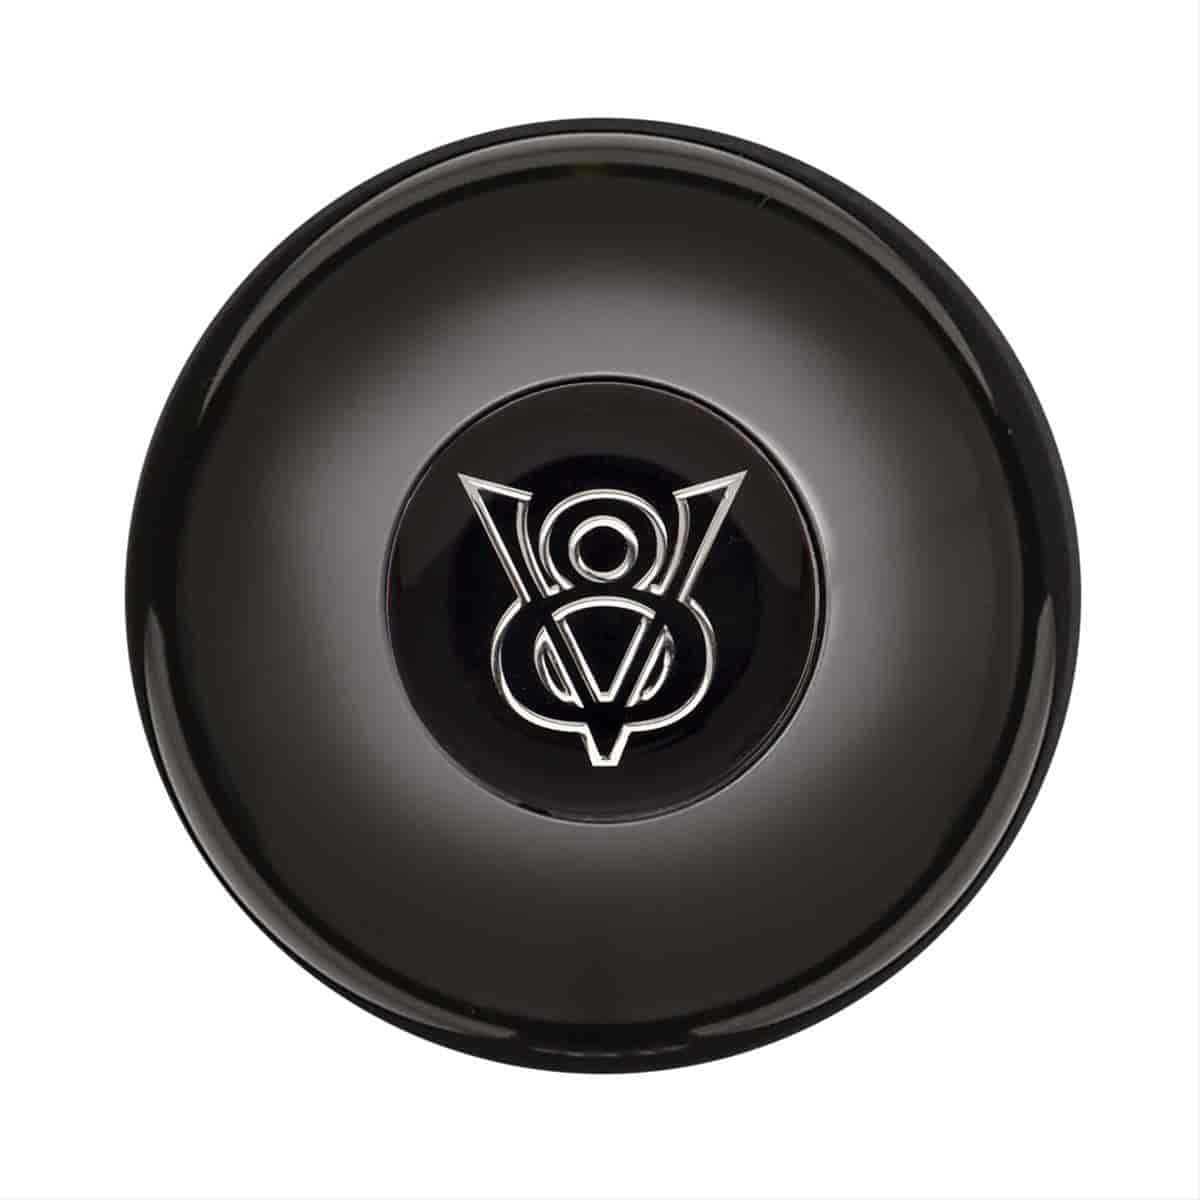 GT3 Gasser/Euro Style Horn Button "V8" Emblem Colored Smooth Style Black Anodized